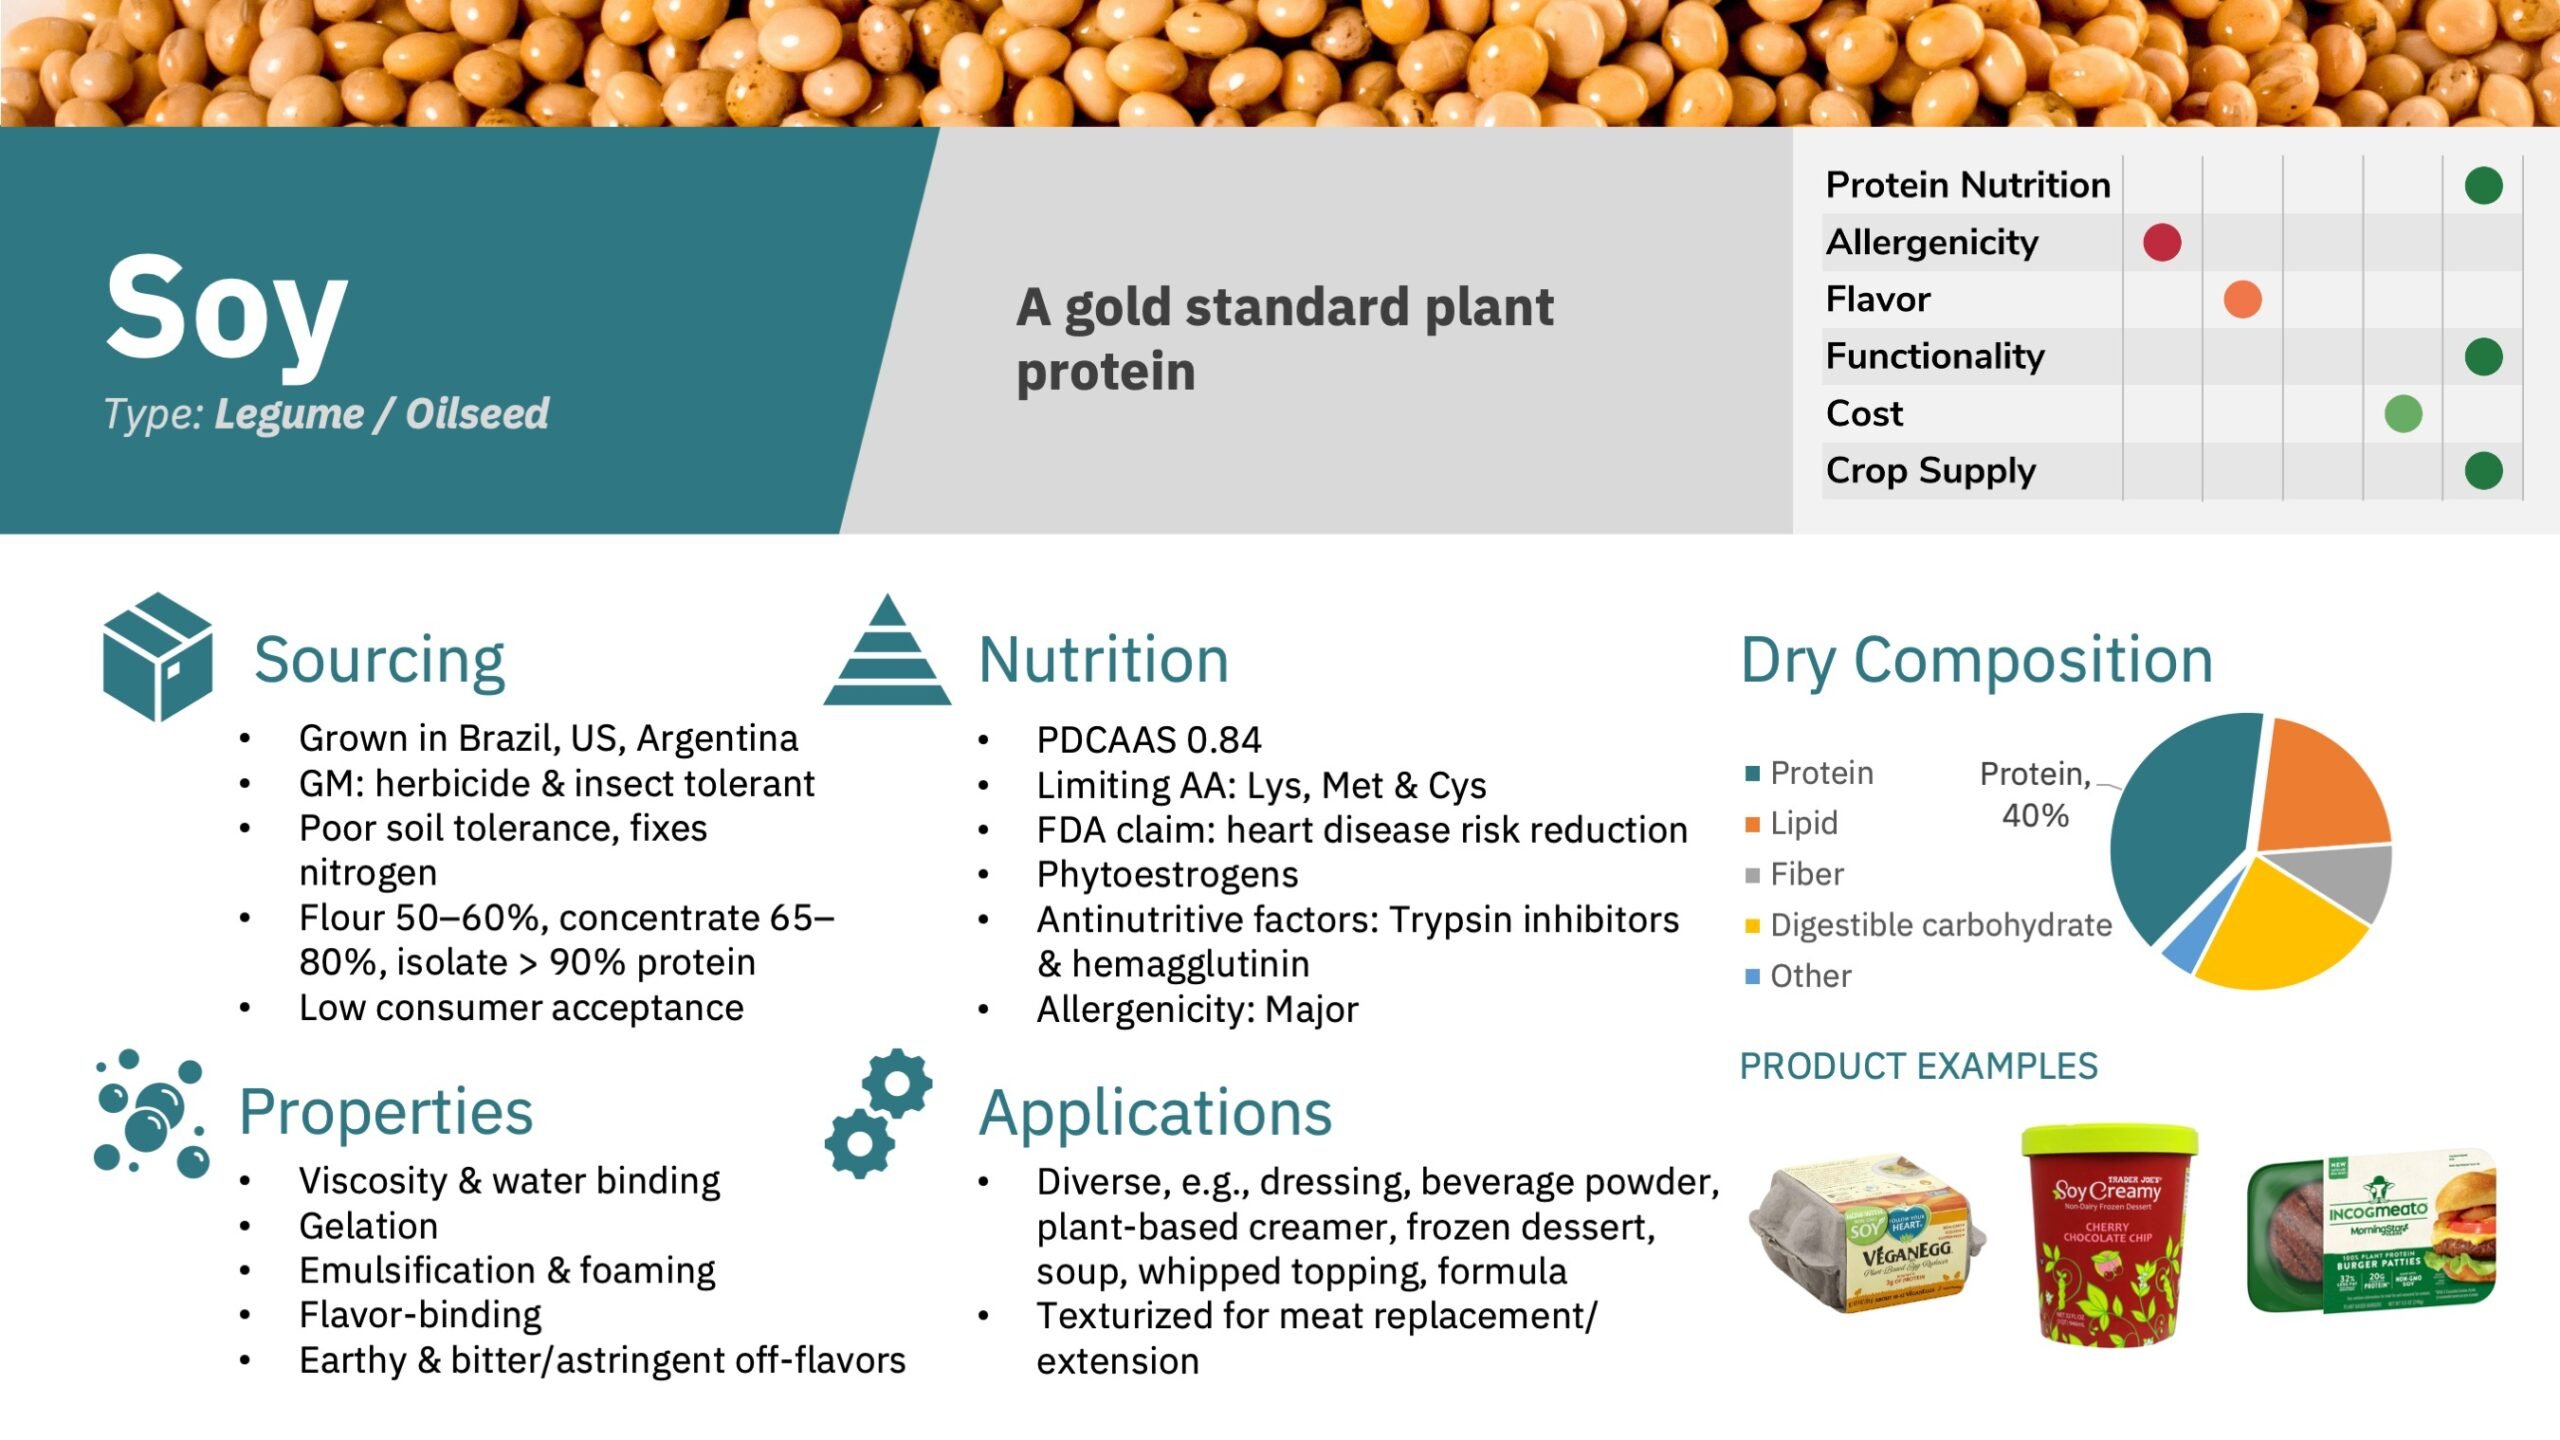 Preview slide showing profiles of 19 major protein sources including nutrition, functionality, price, and sourcing, and highlight an additional 25 emerging sources.